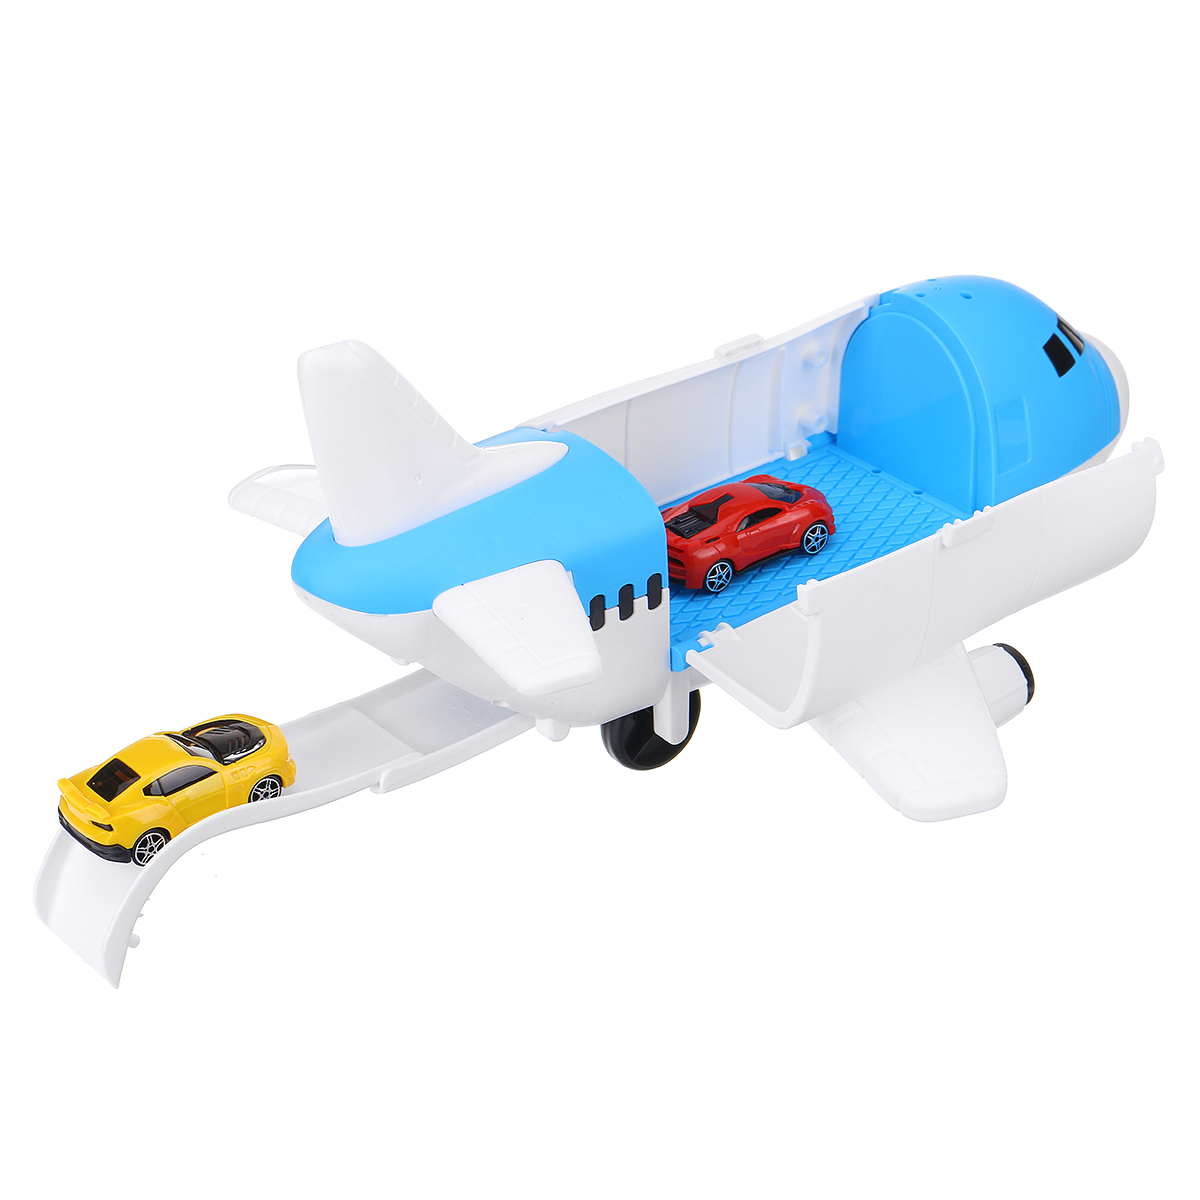 Storage-Transport-Aircraft-Model-Inertia-Diecast-Model-Car-Set-Toy-for-Childrens-Gift-1621631-3